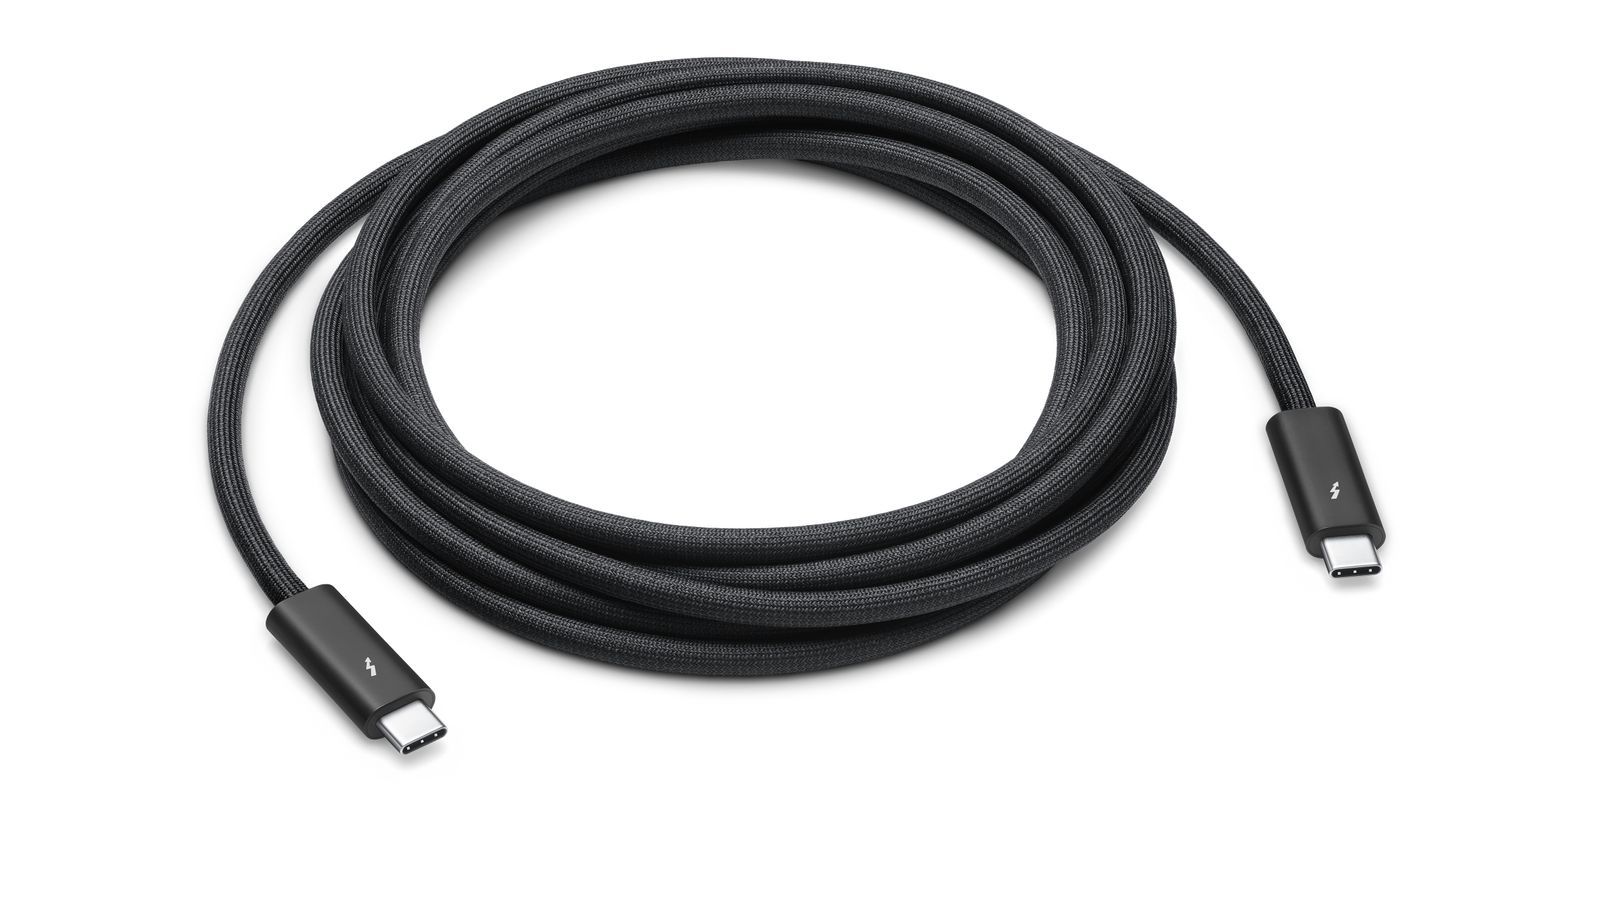 Apple Watch SE Now Comes With a USB-C Charging Cable - MacRumors